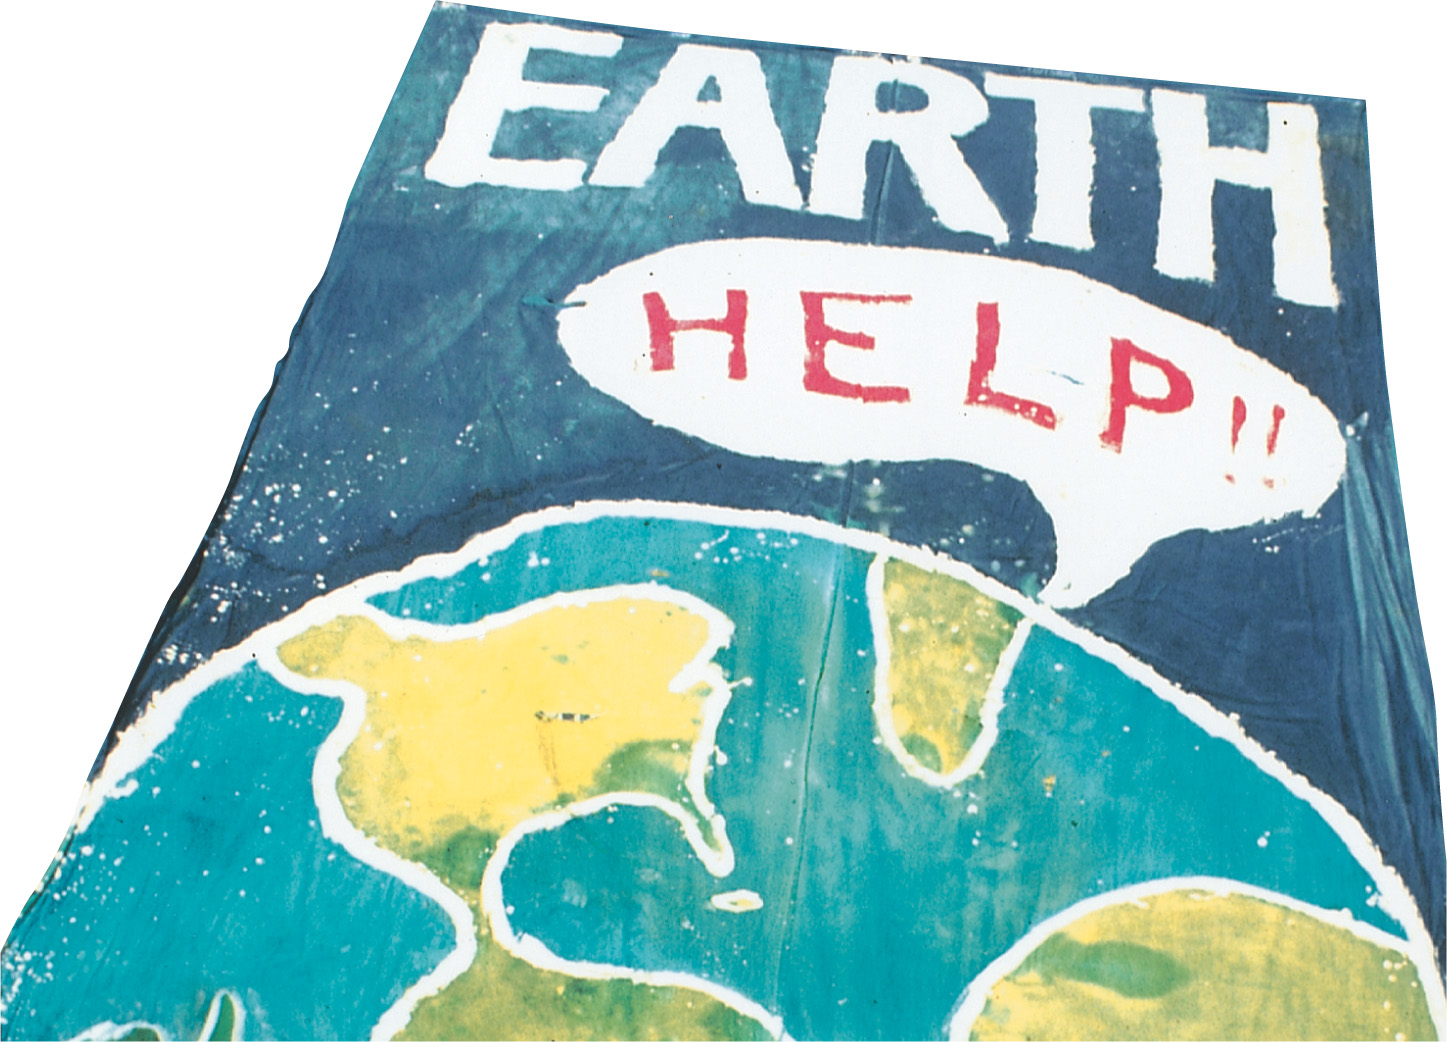 A flag shows the planet earth yelling 'Help!'